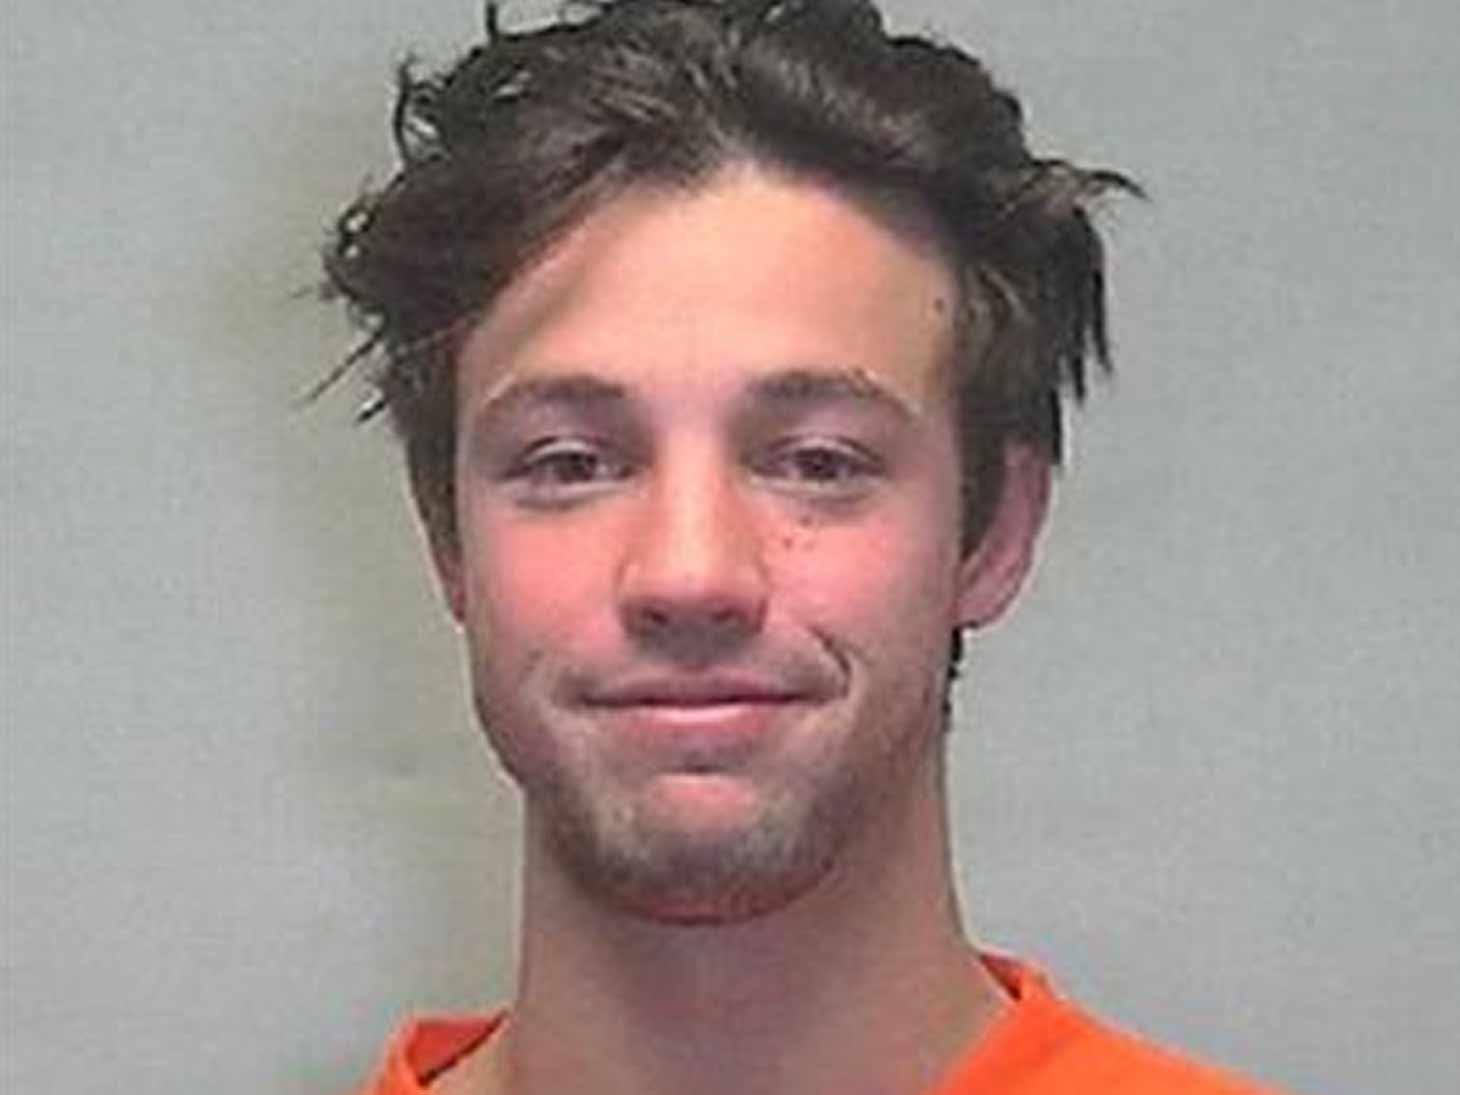 Cameron Dallas Claims Self-Defense After Arrest for Assault